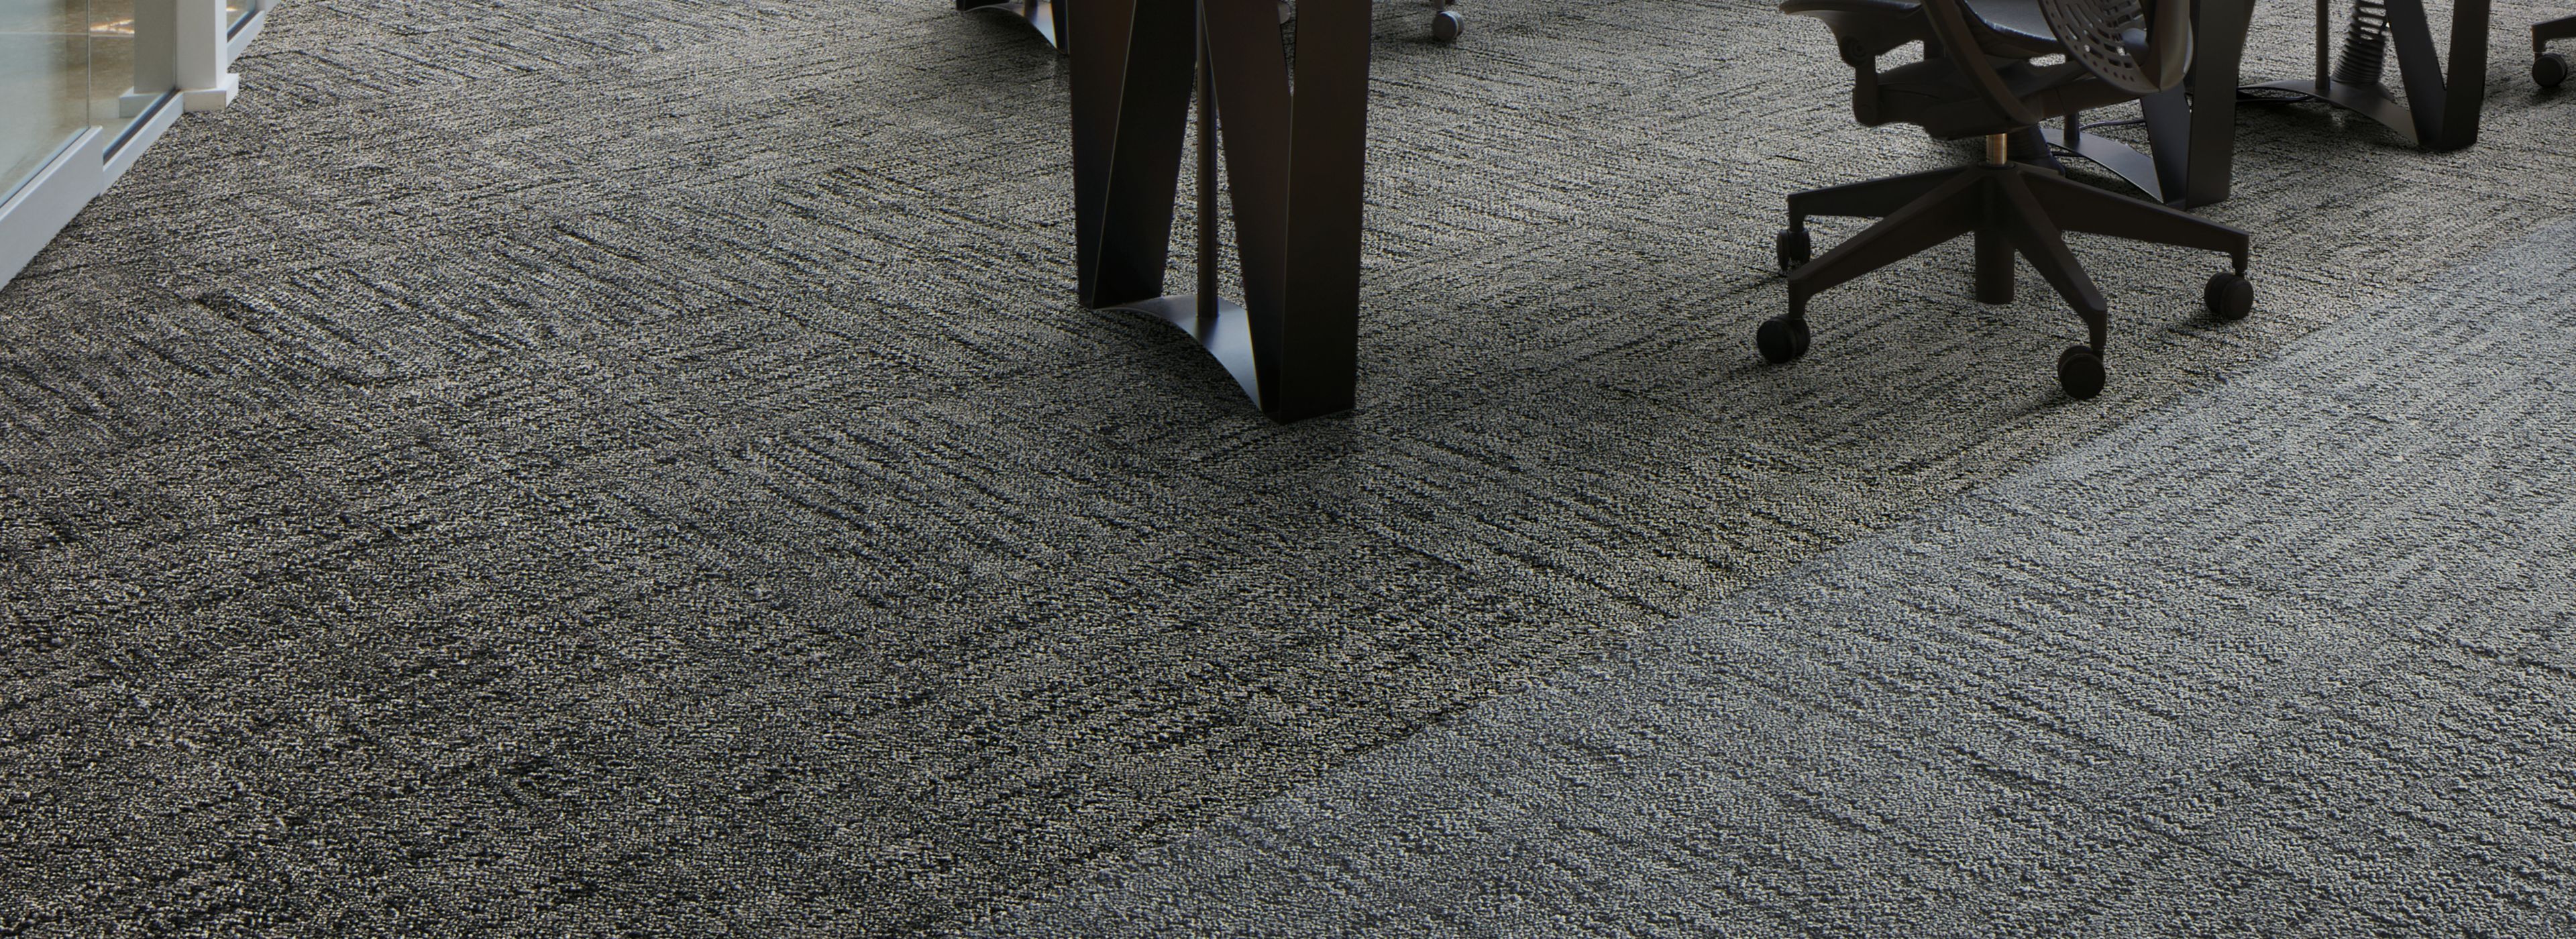 Interface Mirror Mirror carpet tile in open office space with tables and chairs imagen número 1